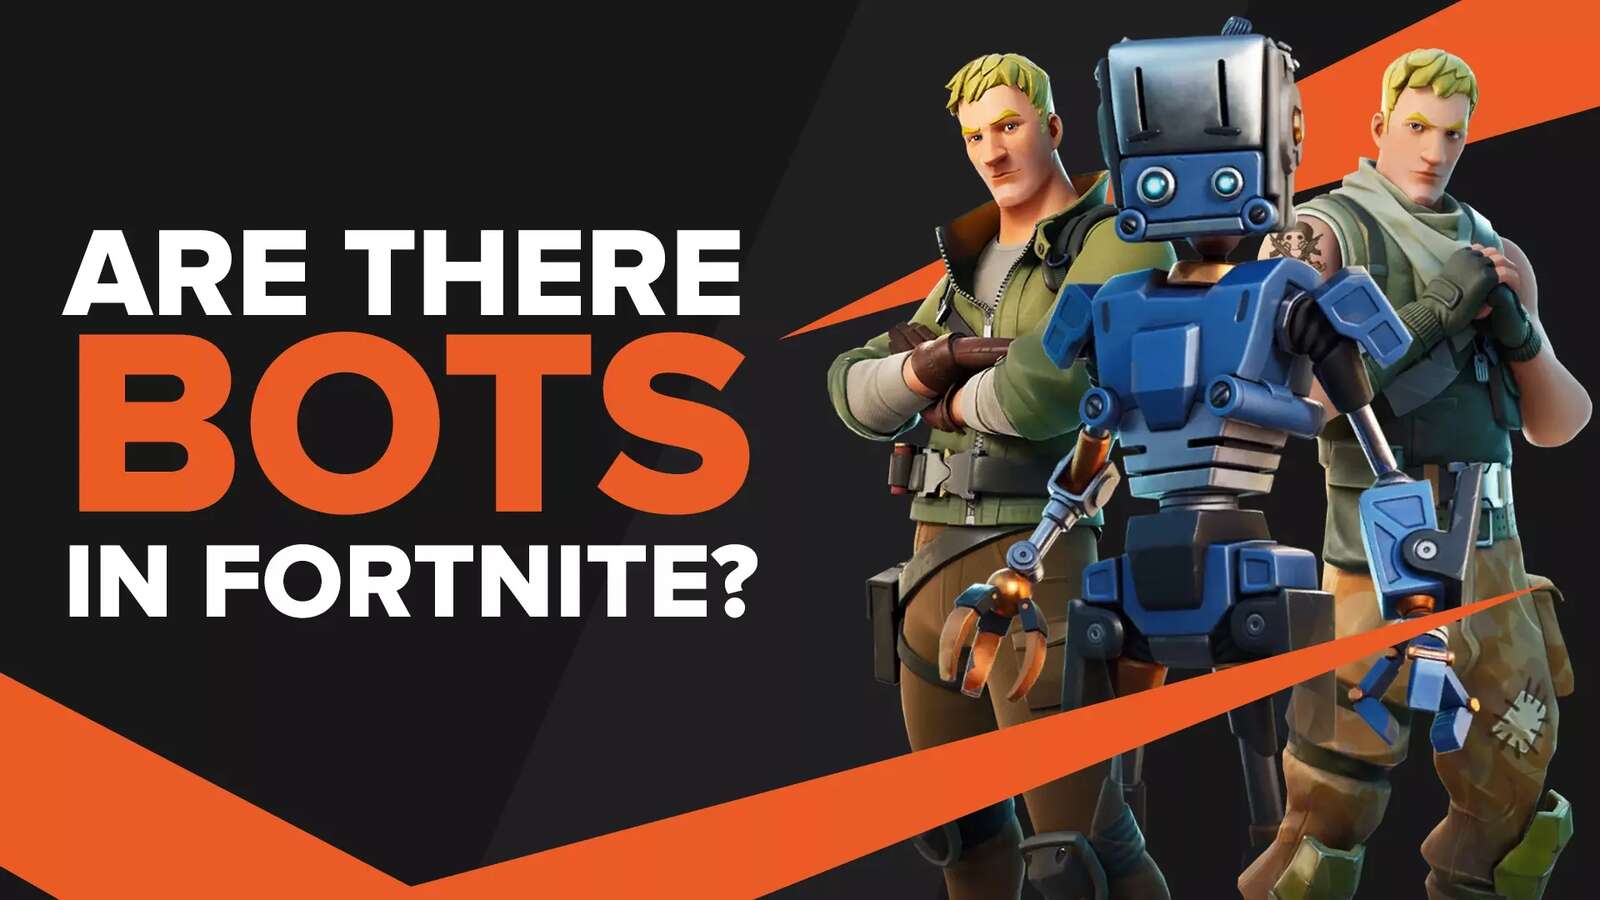 Are There Bots in Fortnite? [Actual Truth]